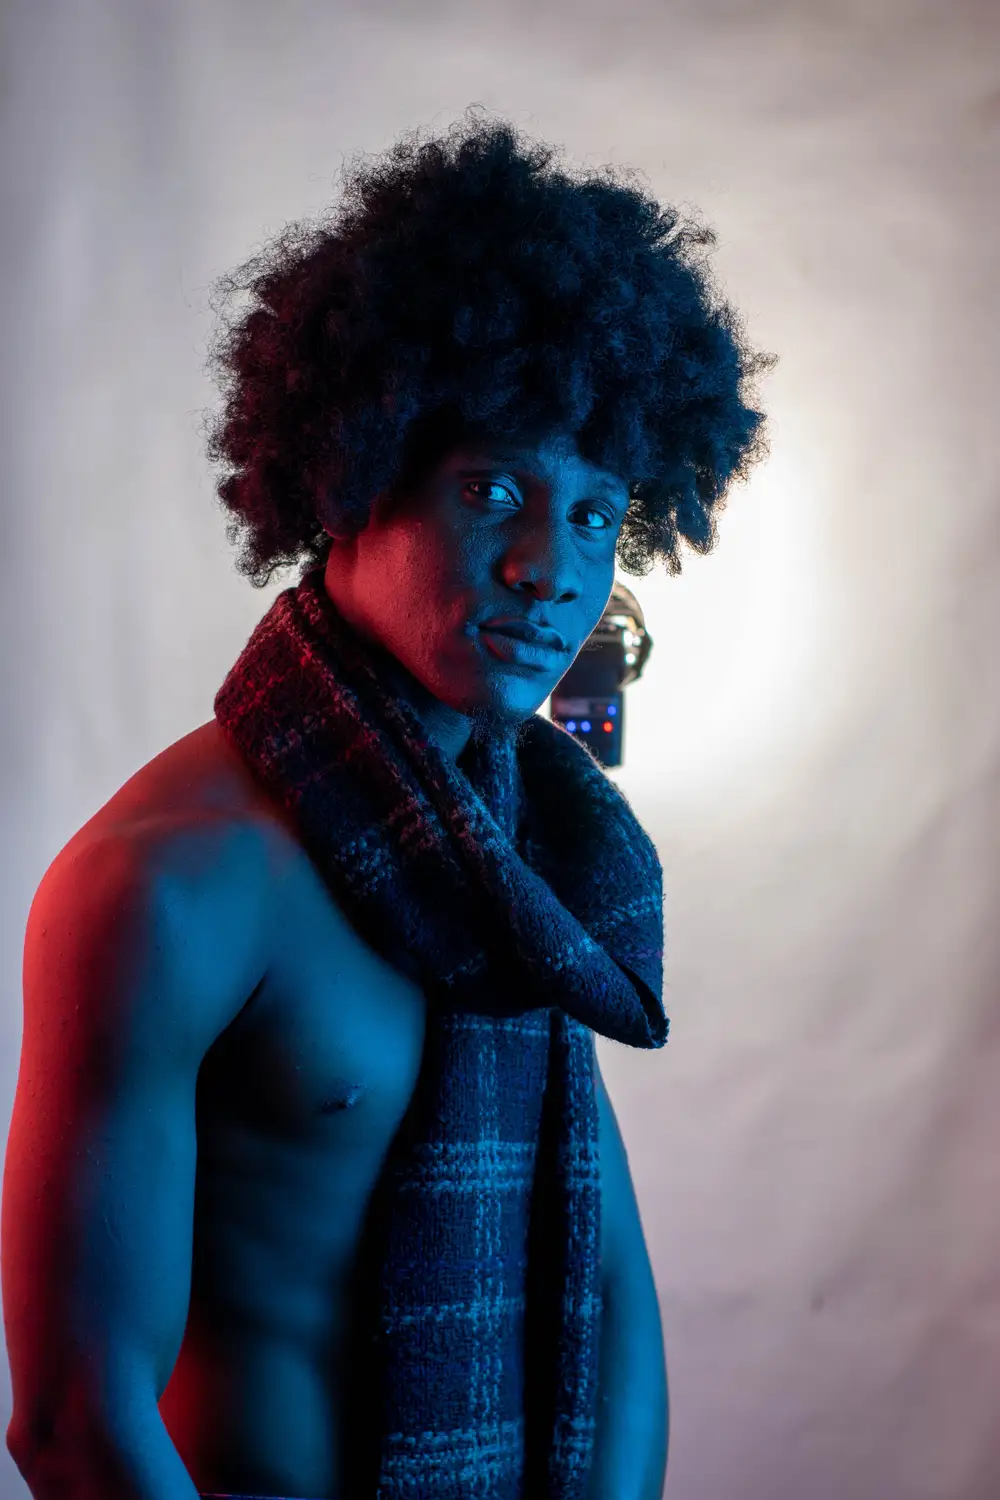 model with afro hairstyle has a scarf around his neck and looks at the camera